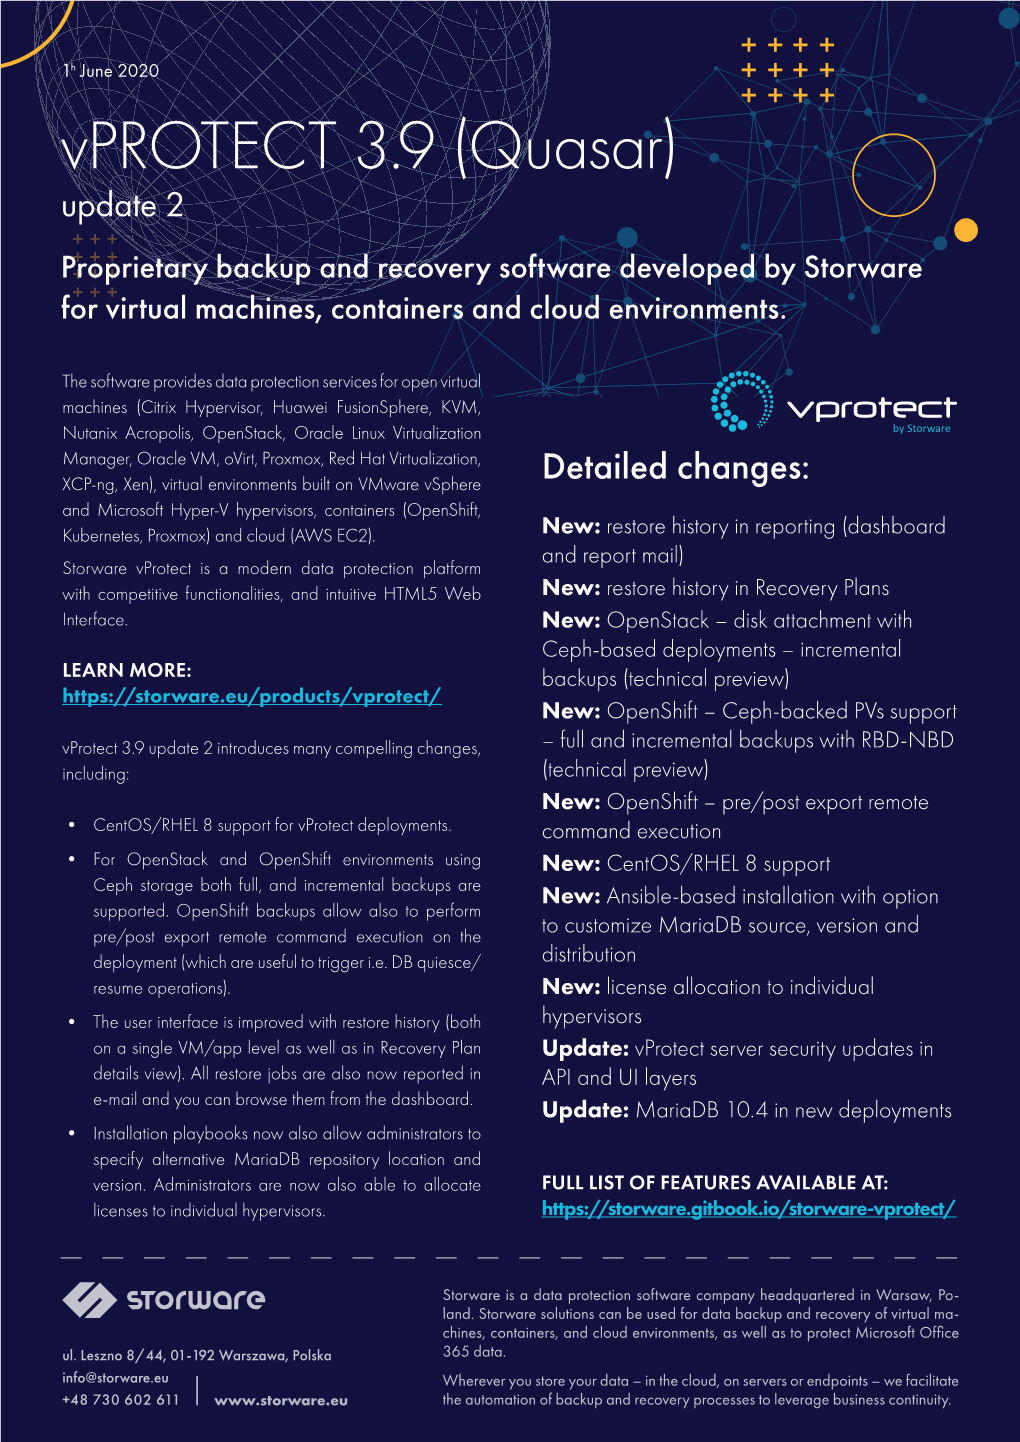 Vprotect 3.9 (Quasar) Update 2 Proprietary Backup and Recovery Software Developed by Storware for Virtual Machines, Containers and Cloud Environments